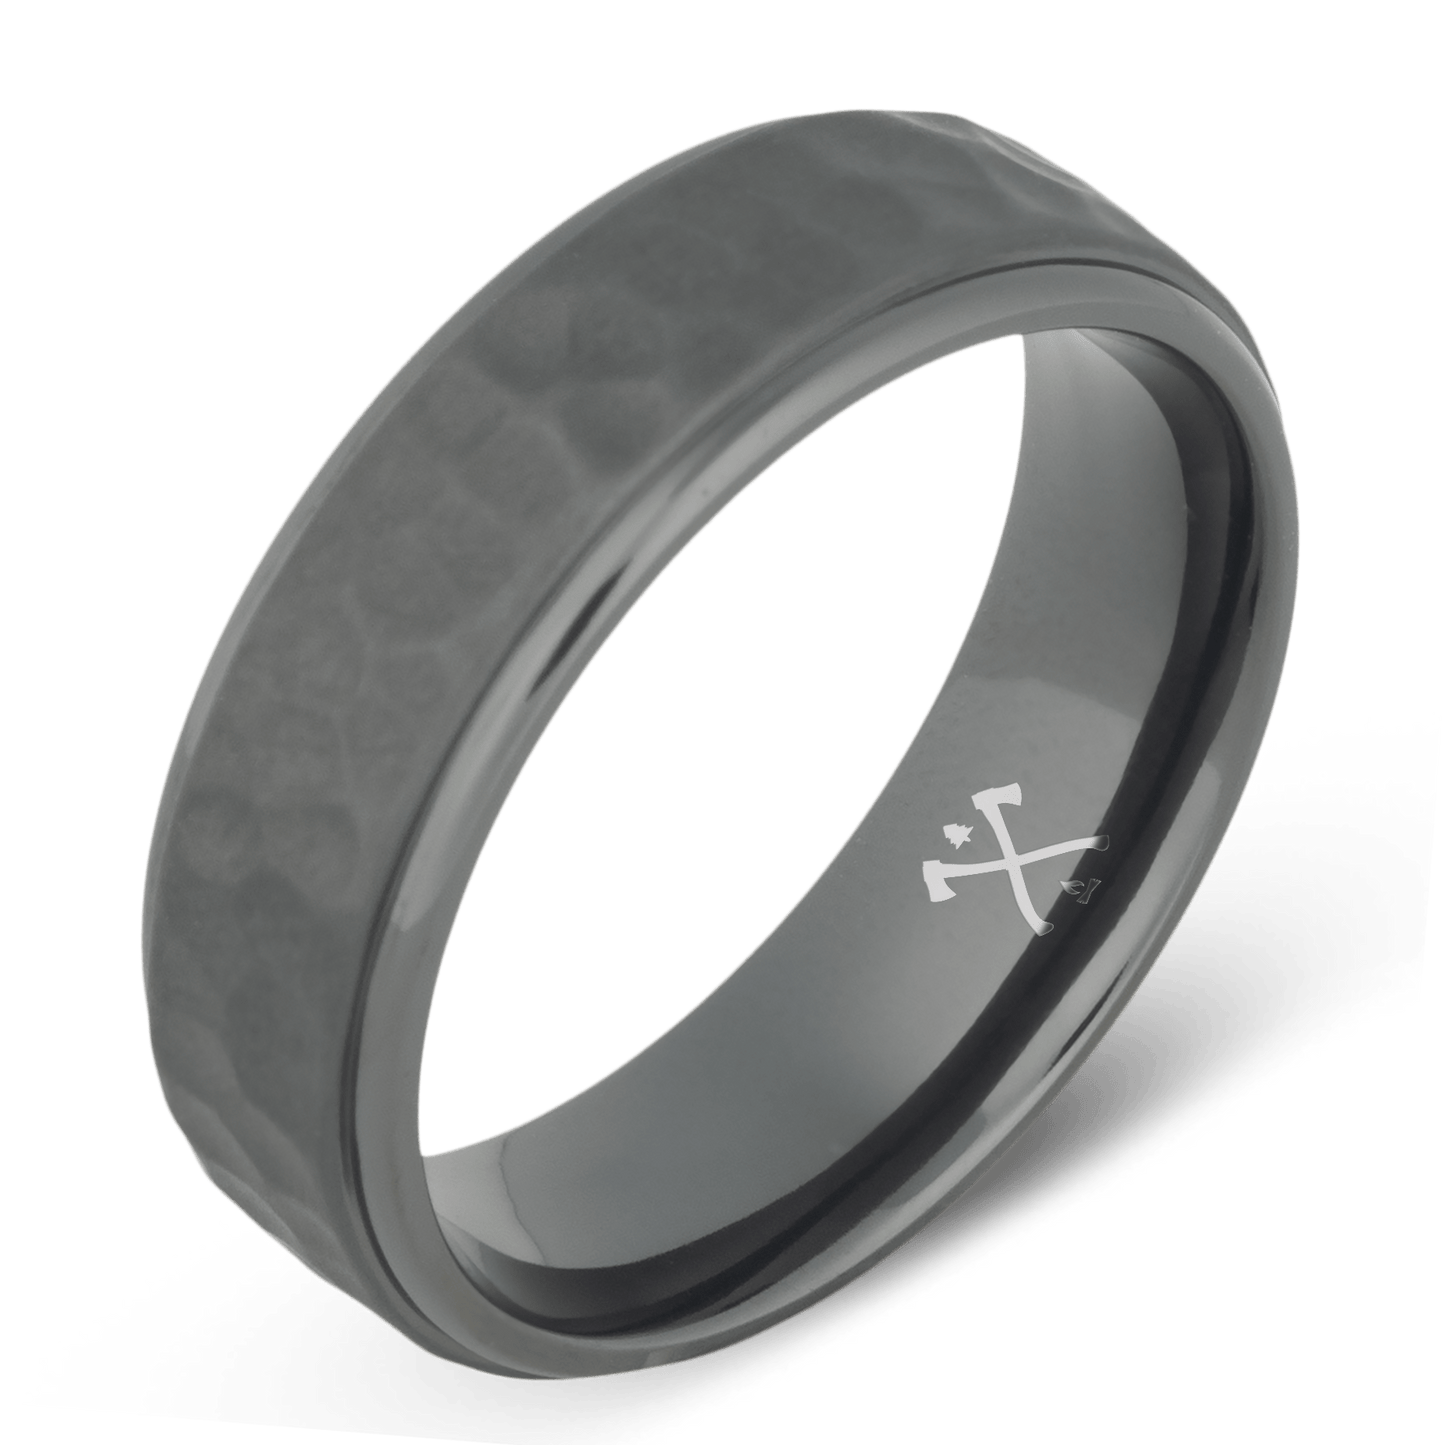 The Extraterrestrial - Men's Wedding Rings - Manly Bands